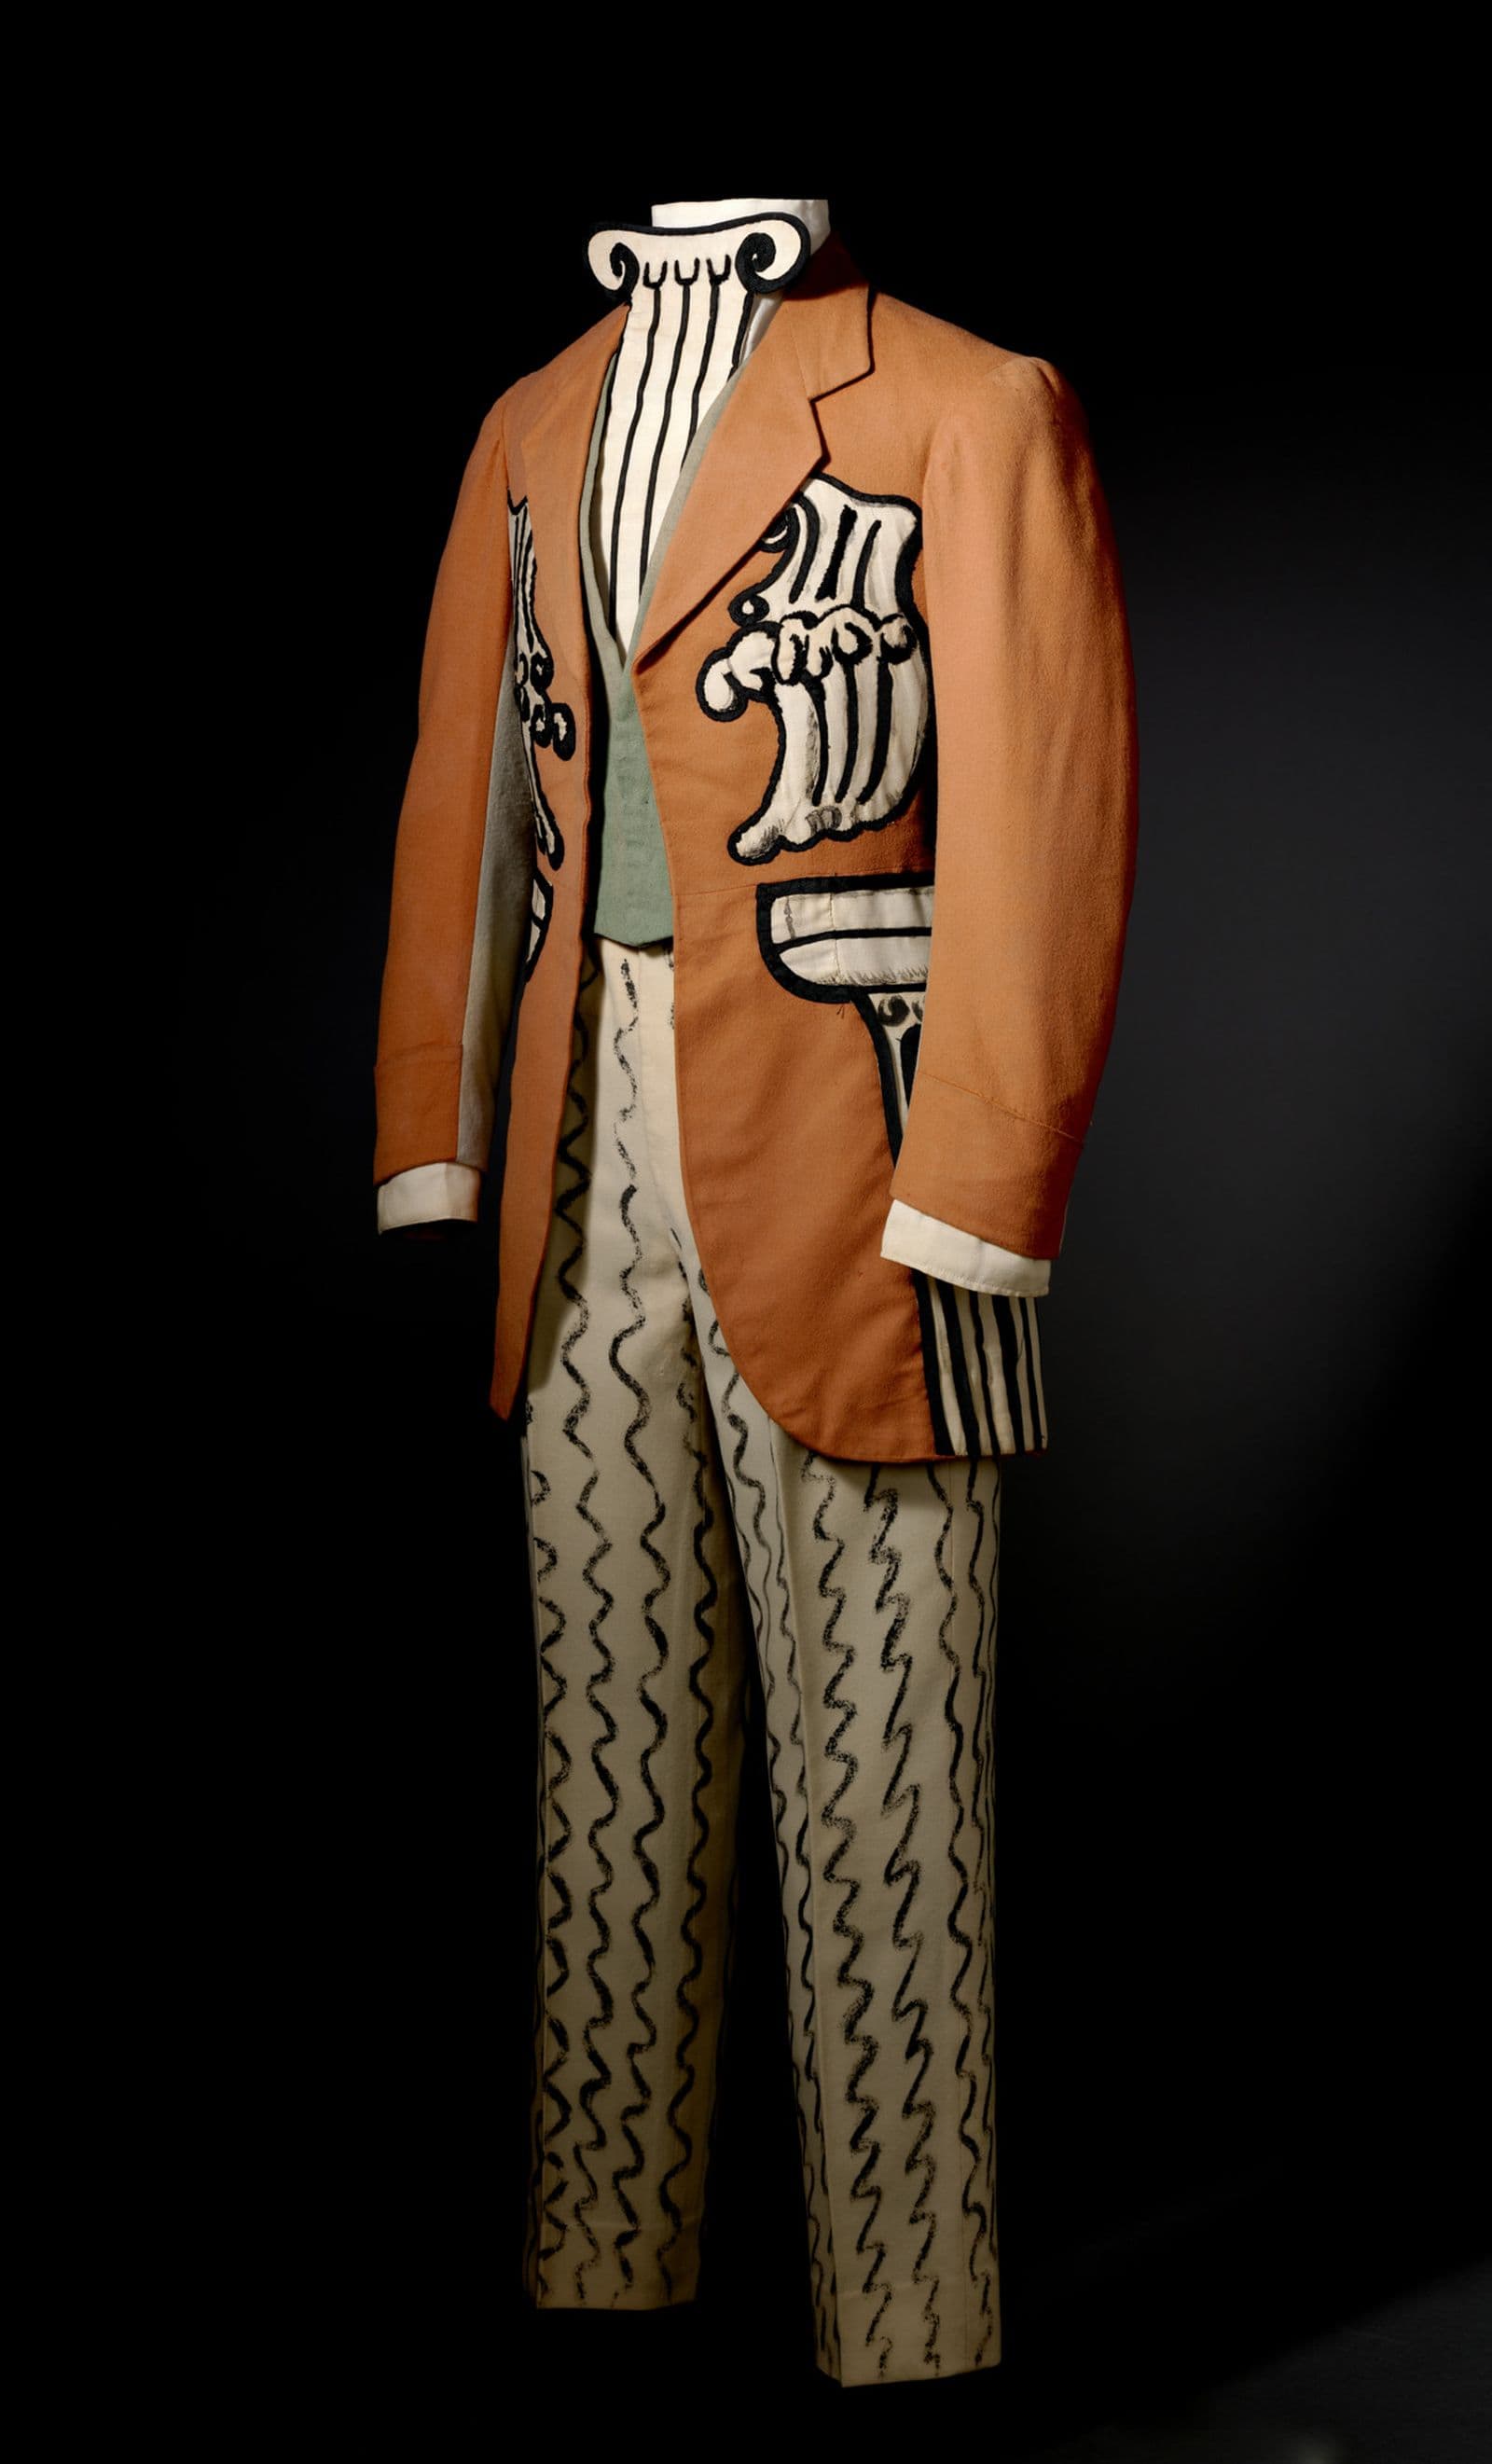 Photo of theatrical suit costume with column motif